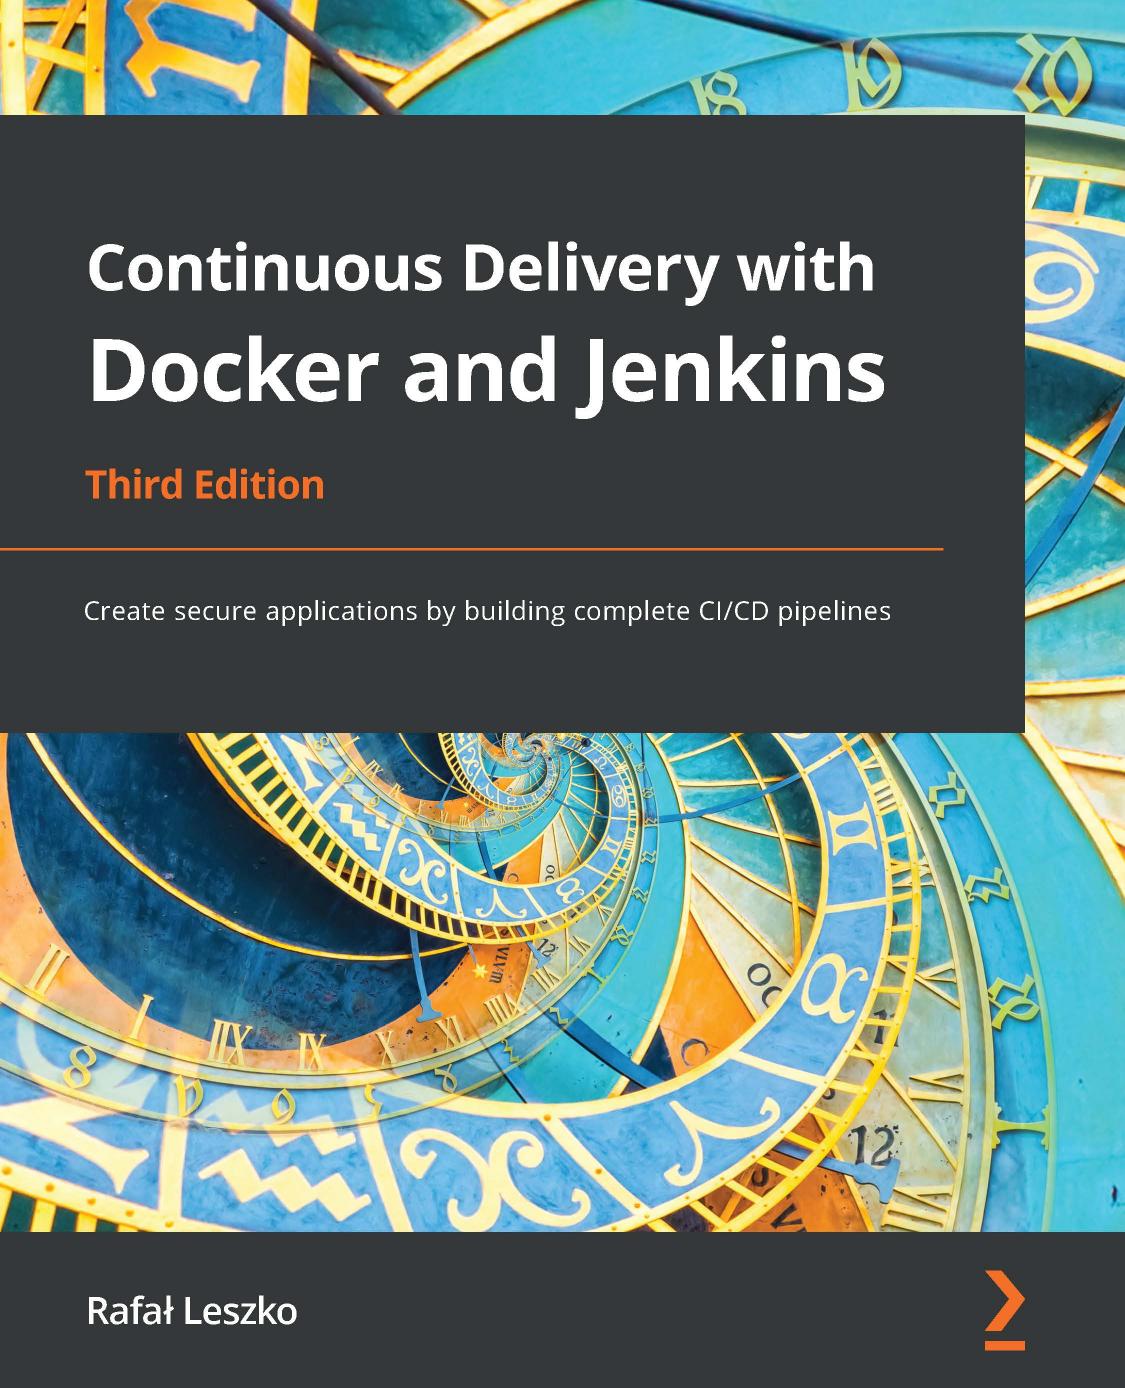 Continuous Delivery With Docker and Jenkins: Create Secure Applications by Building Complete CI/CD Pipelines